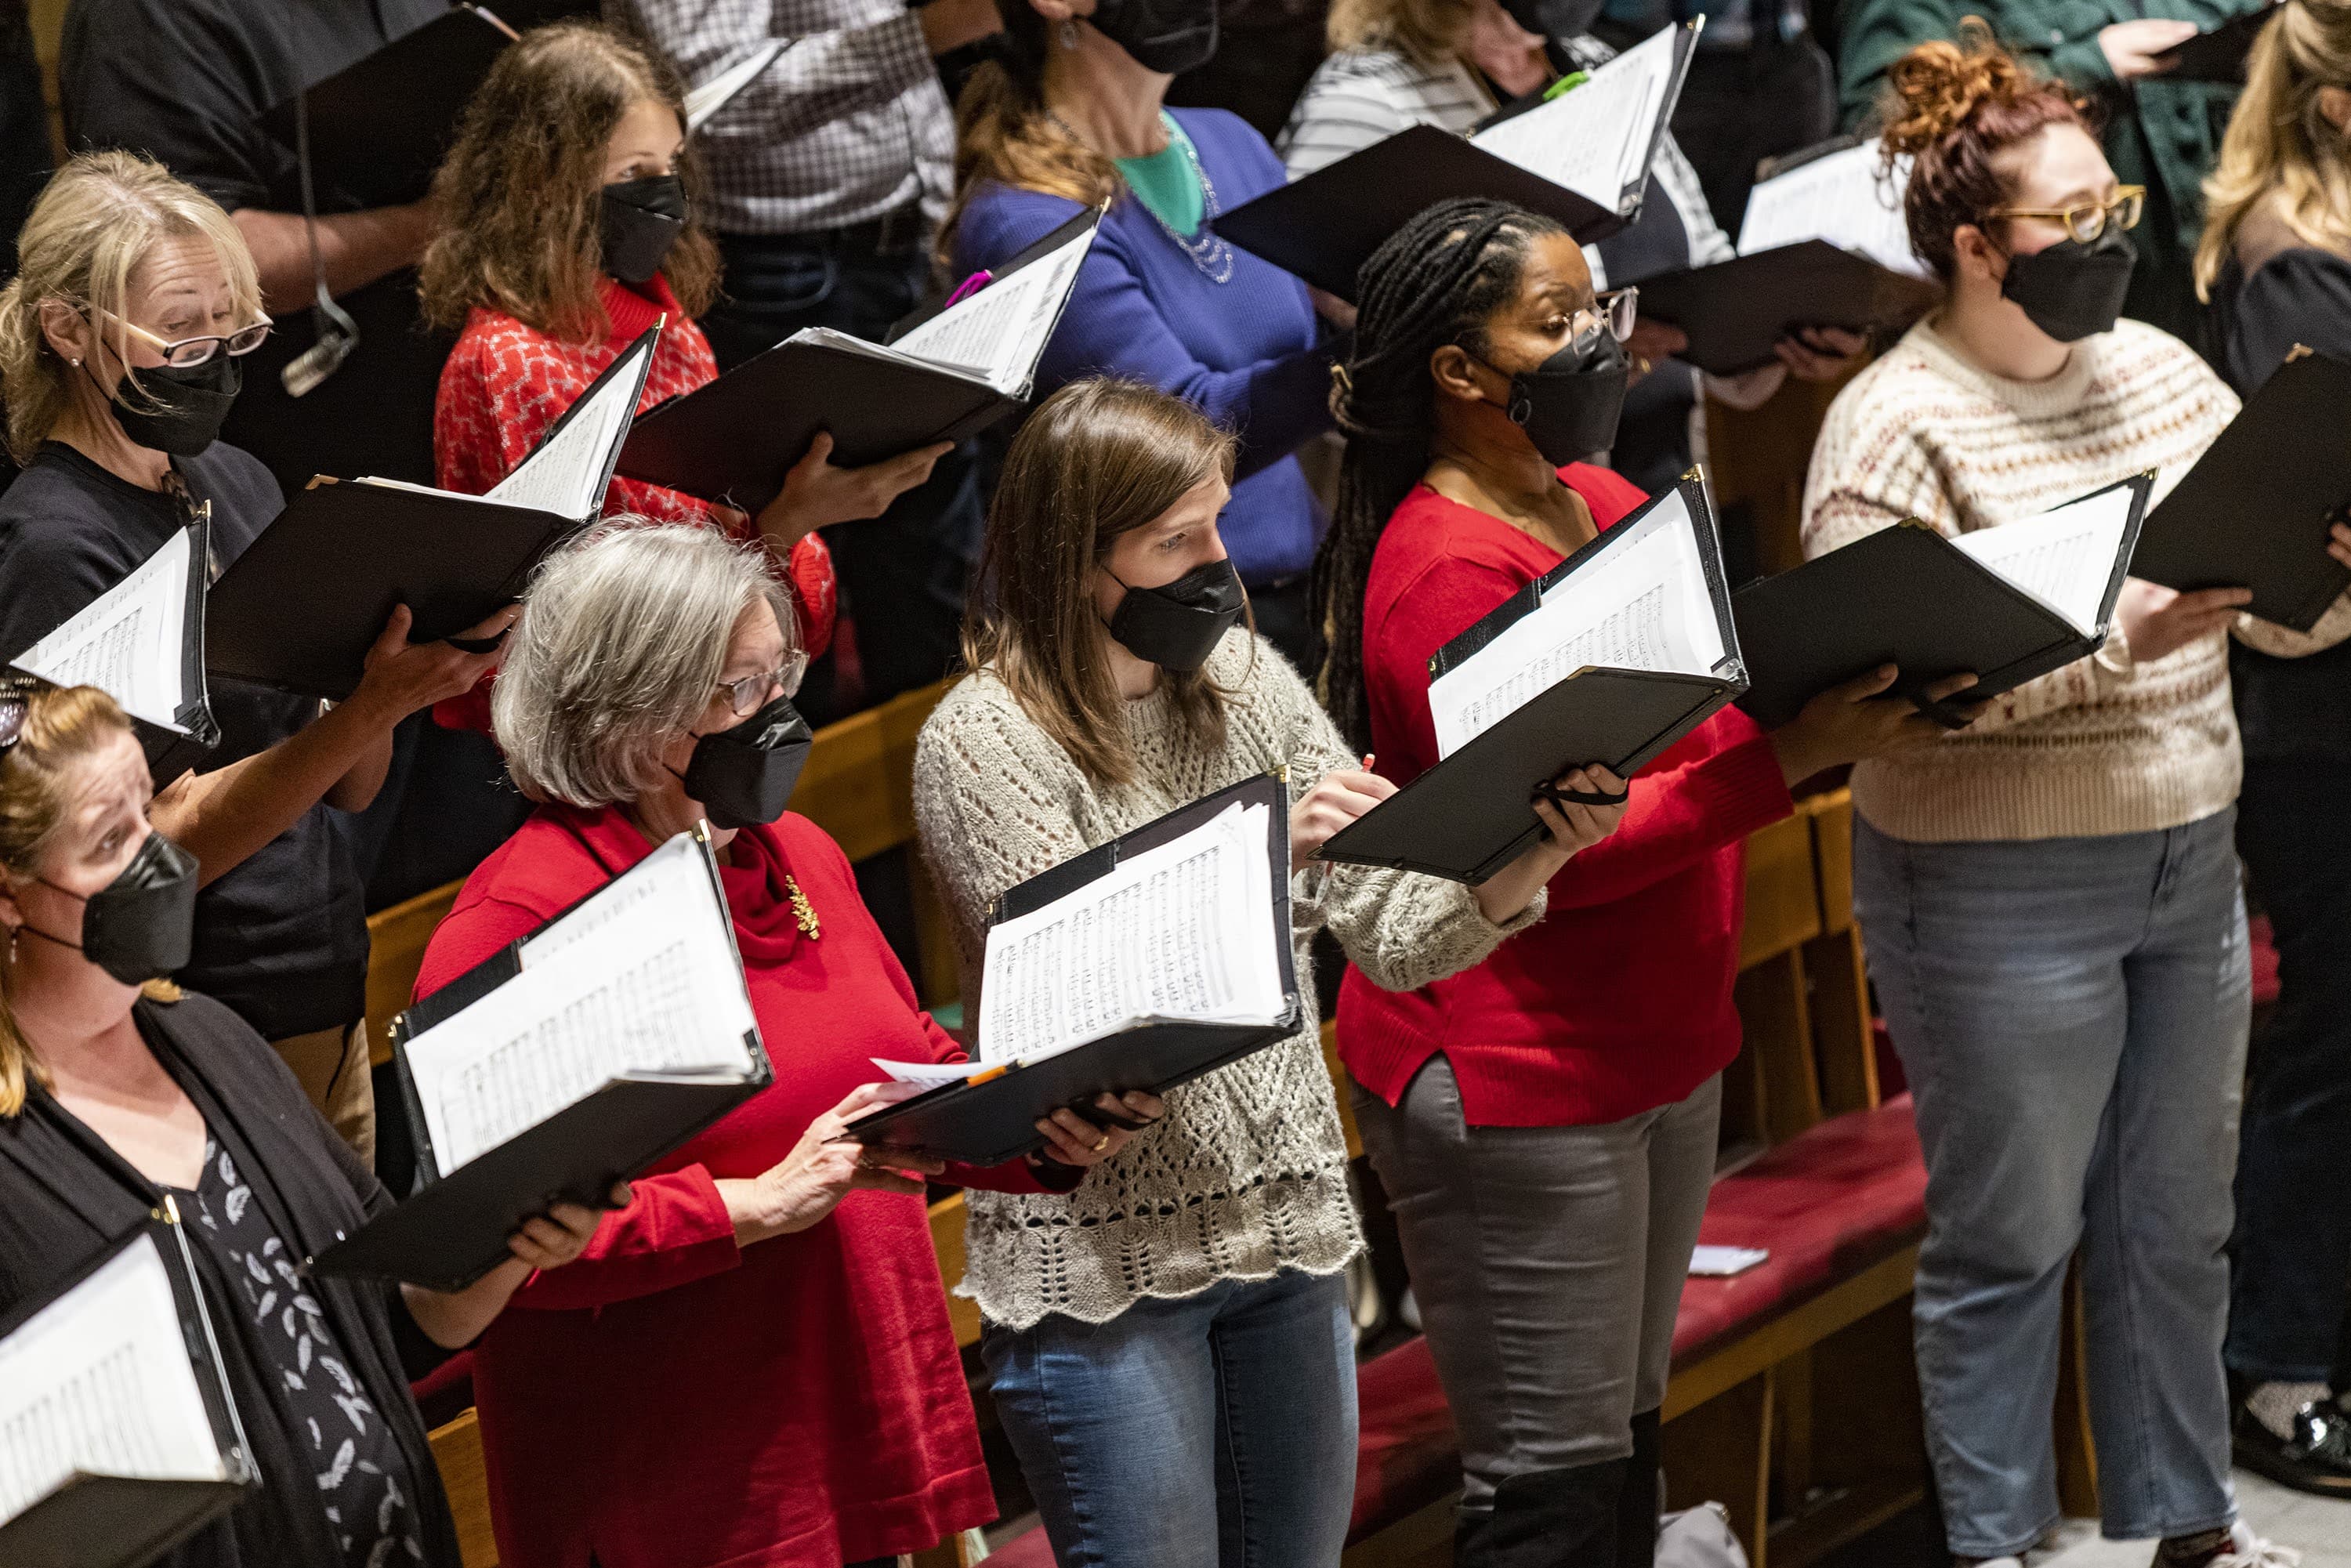 The Tanglewood chorus rehearses at Symphony Hall for the 2021 Holiday Pops concerts. (Jesse Costa/WBUR)